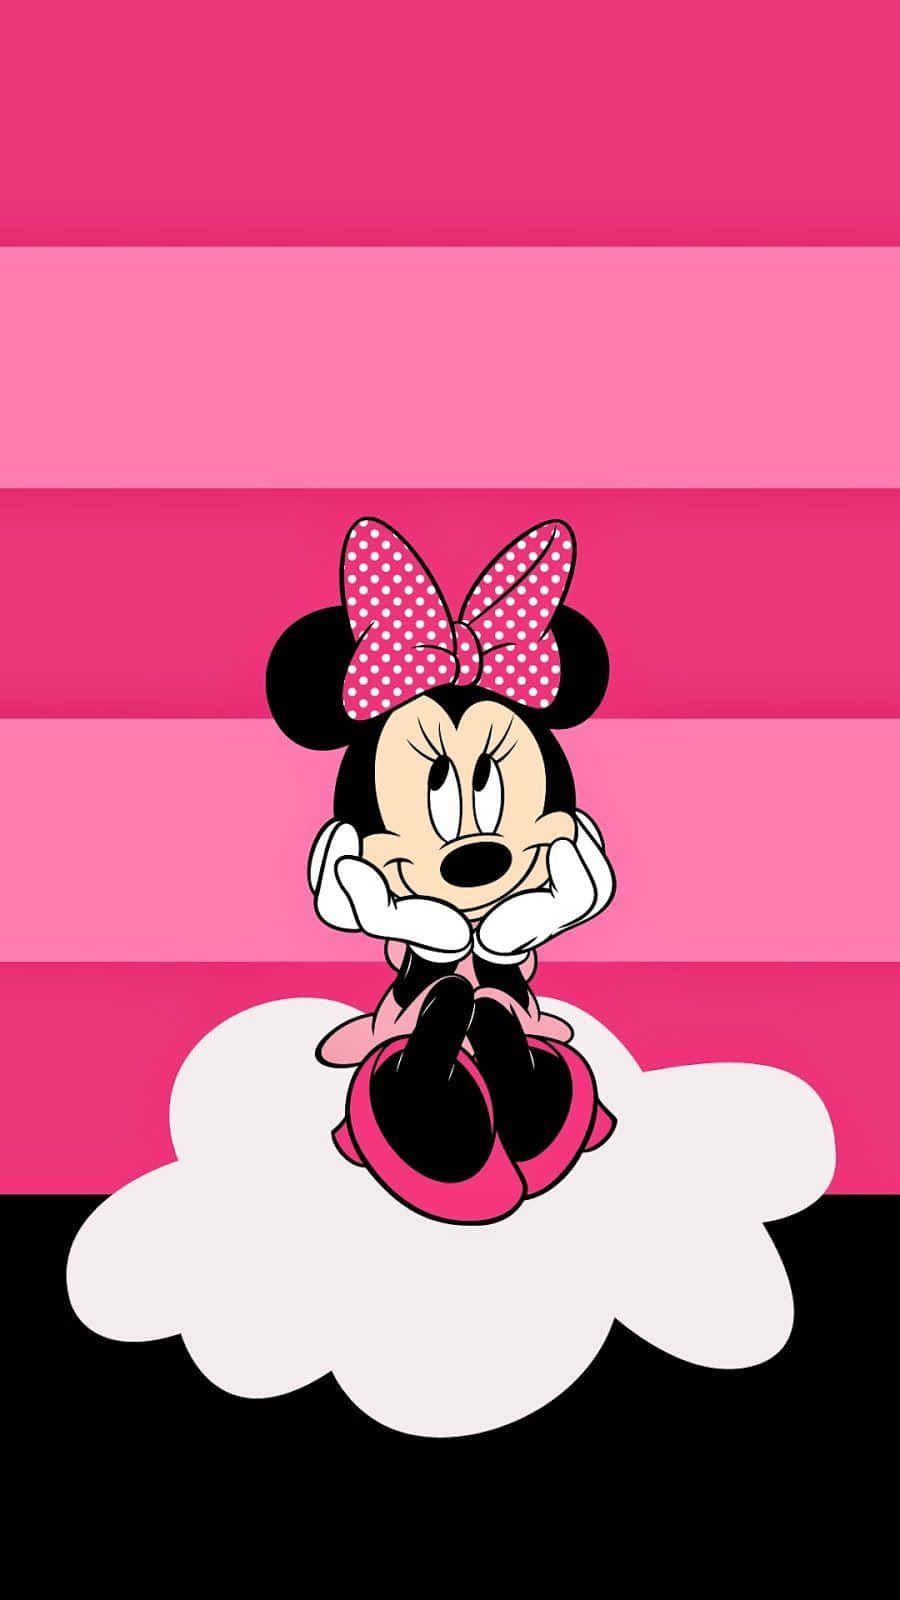 Free Minnie Mouse Pink Wallpaper Downloads, [21+] Minnie Mouse ...